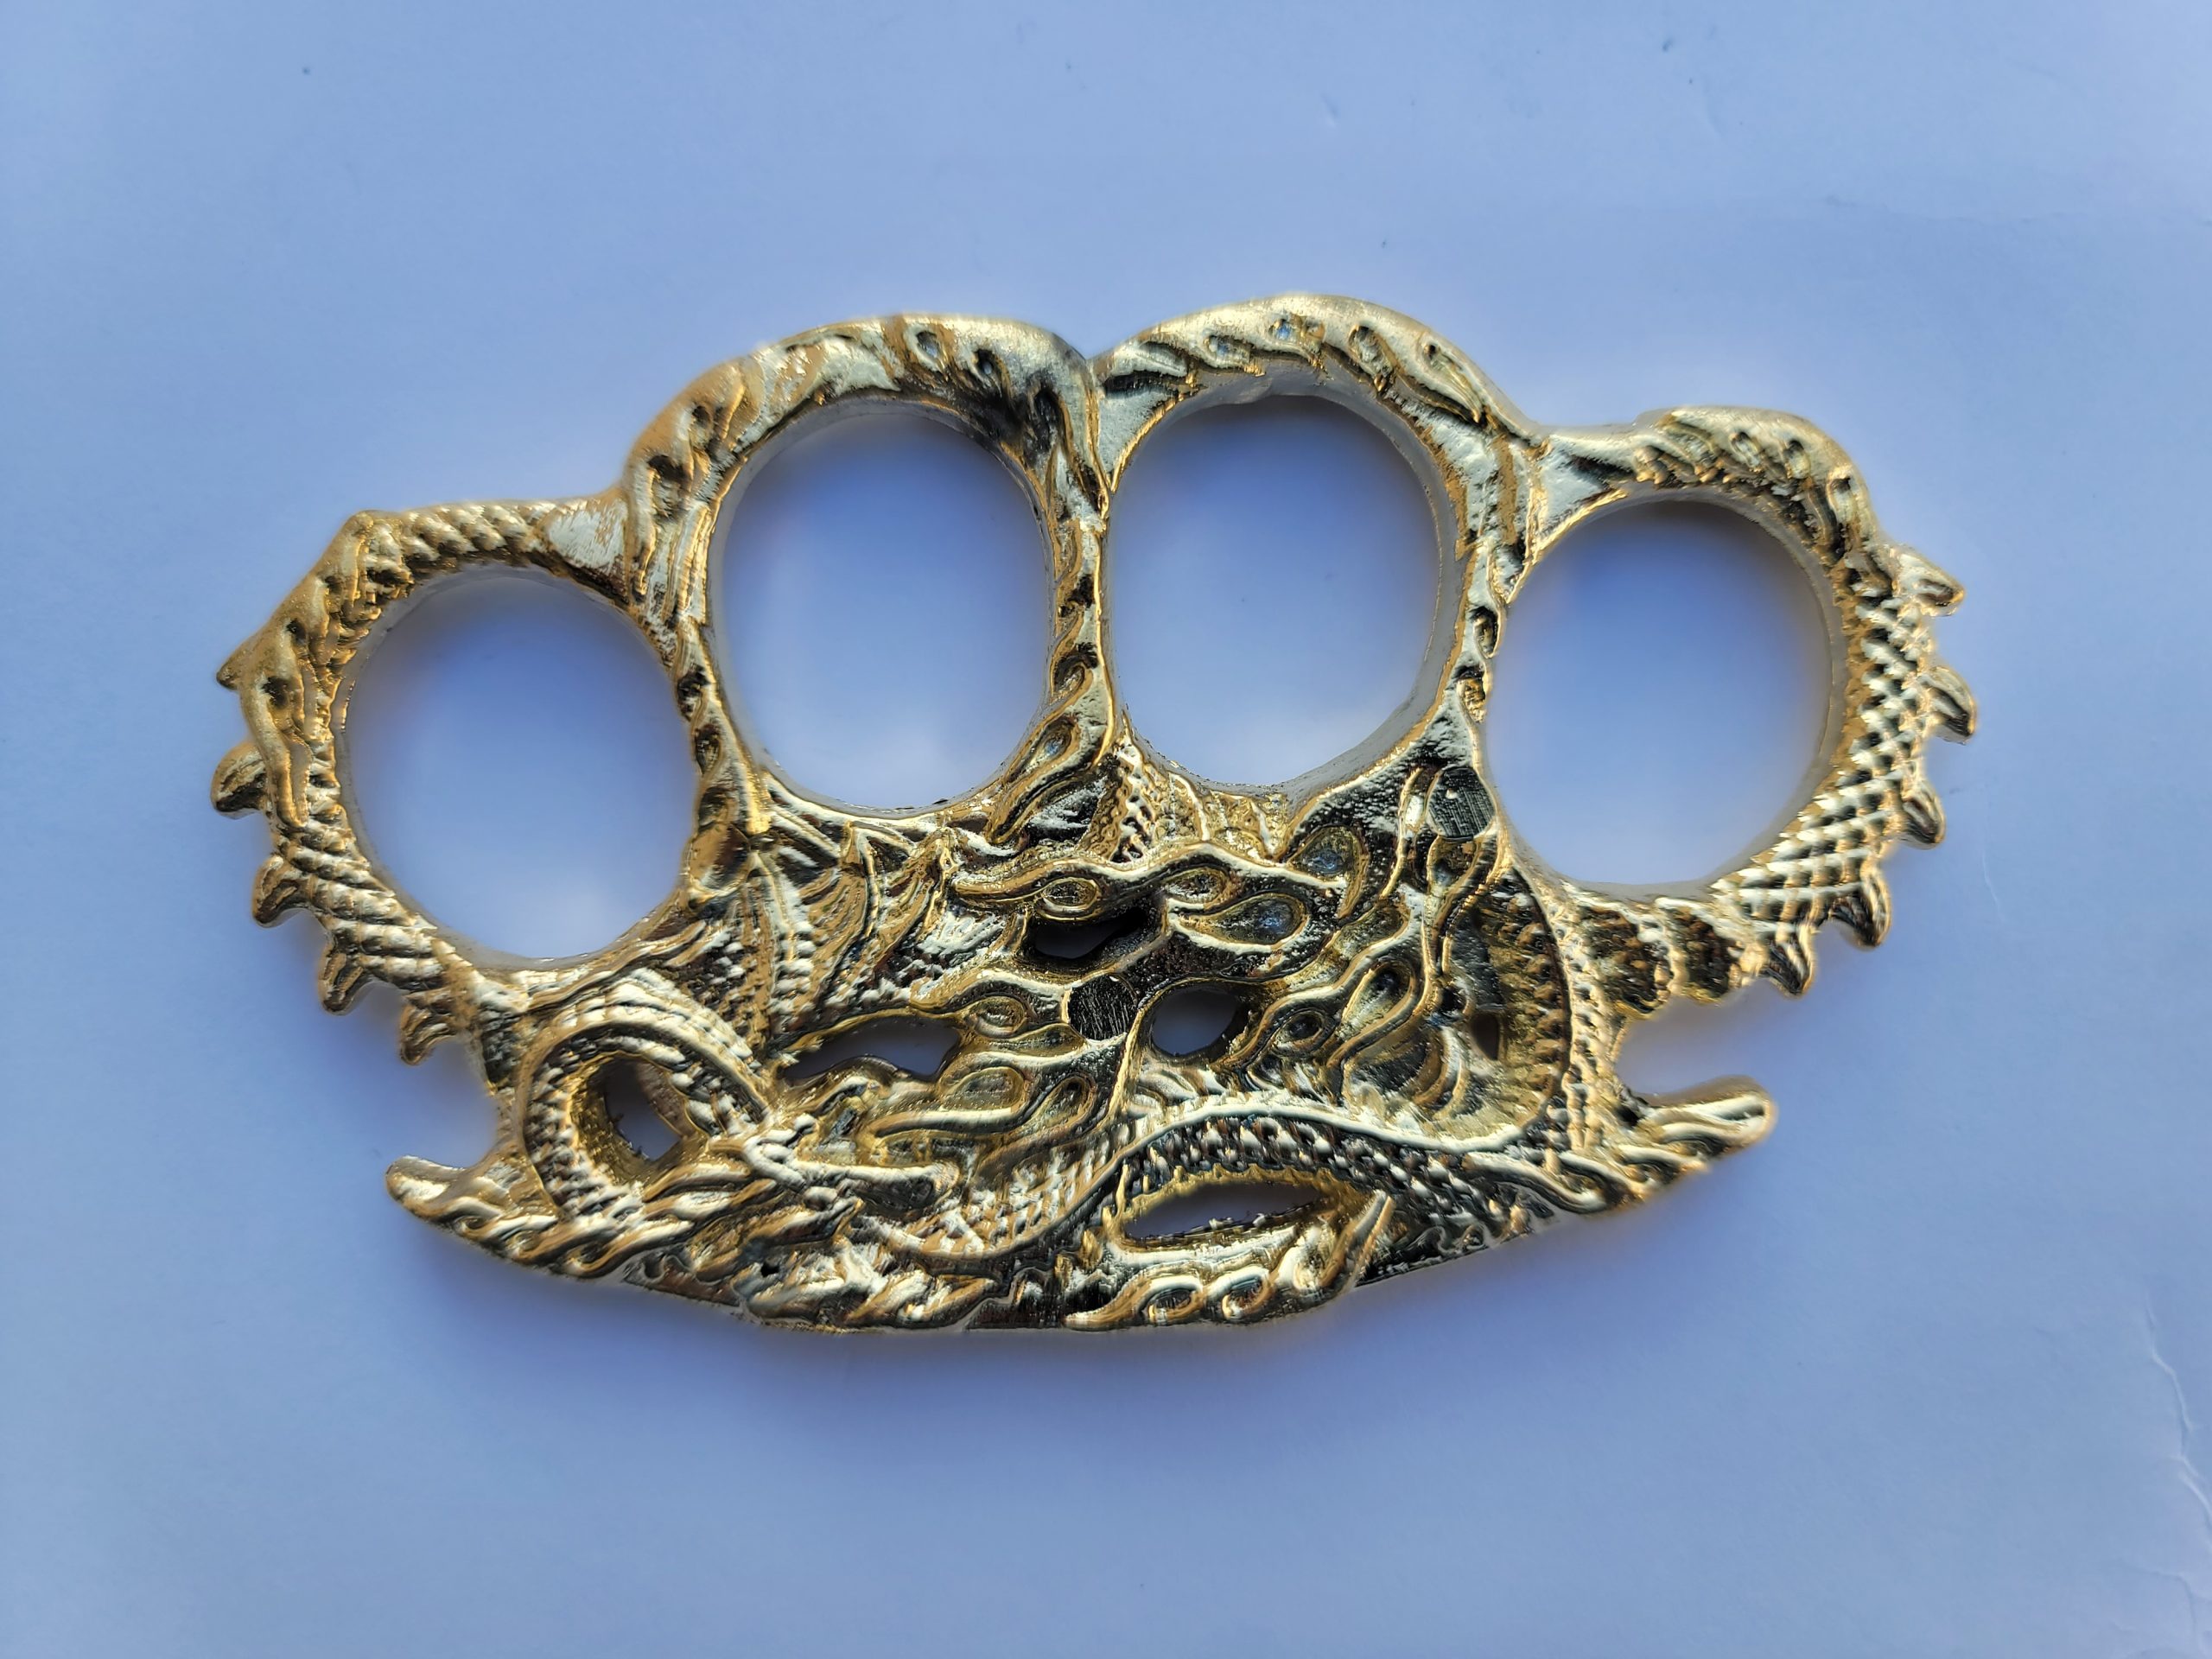 Antique heavy brass Knuckle duster.